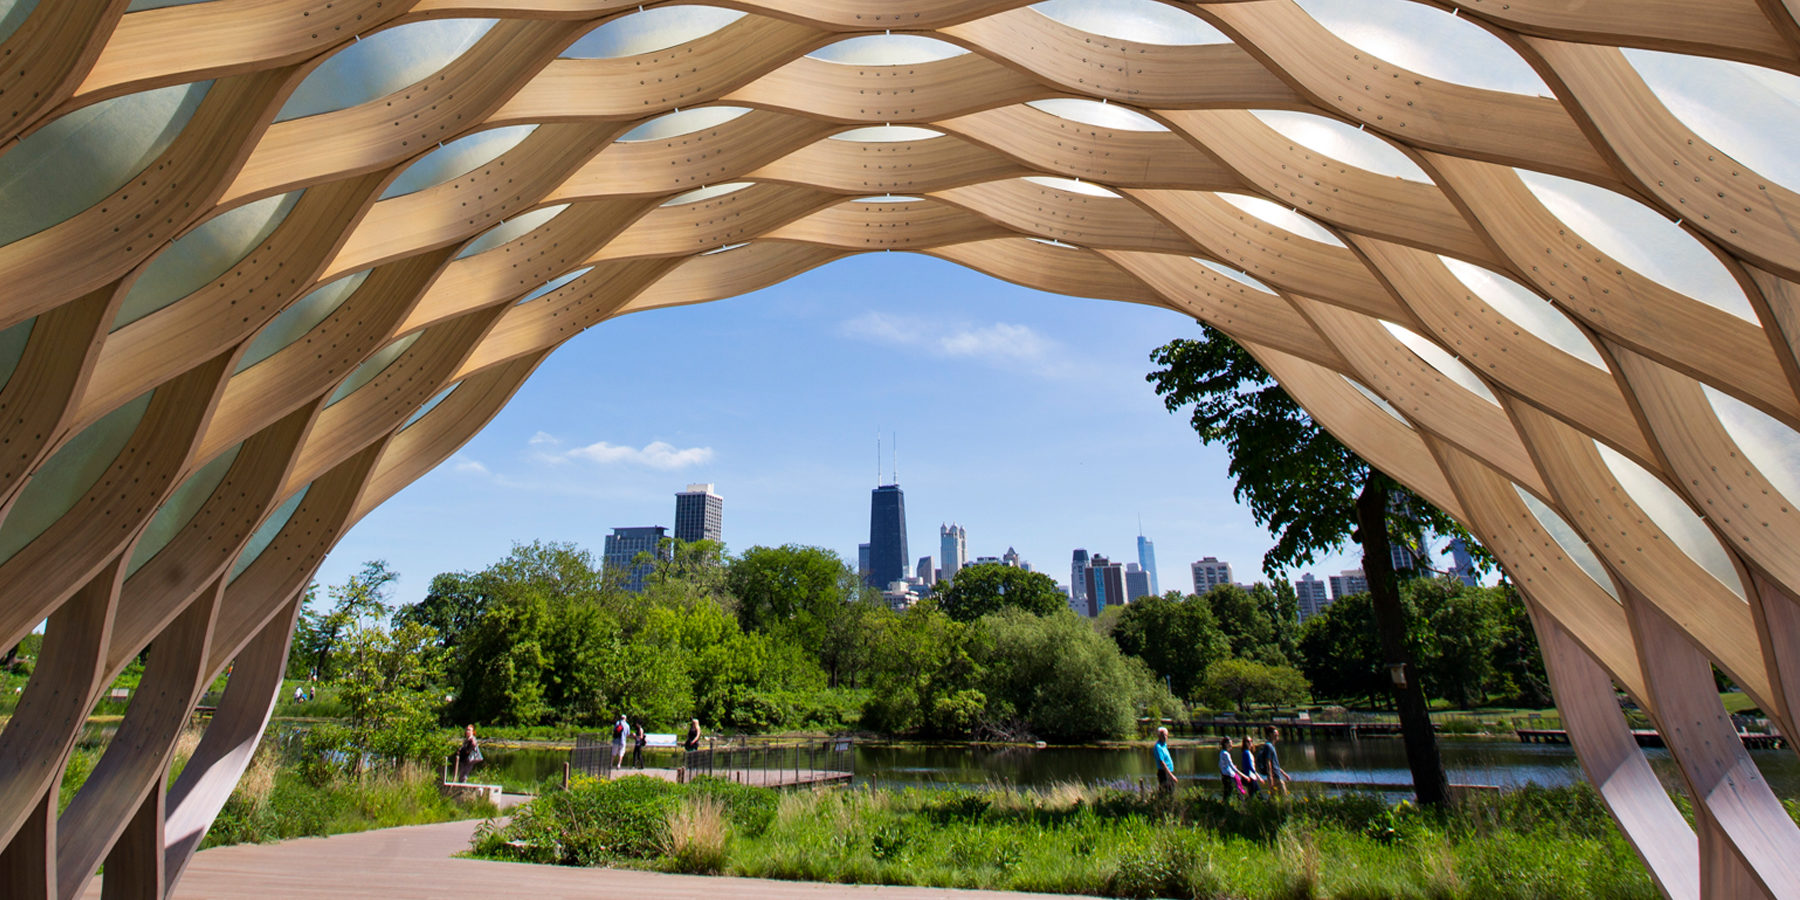 Chicago parks and outdoors